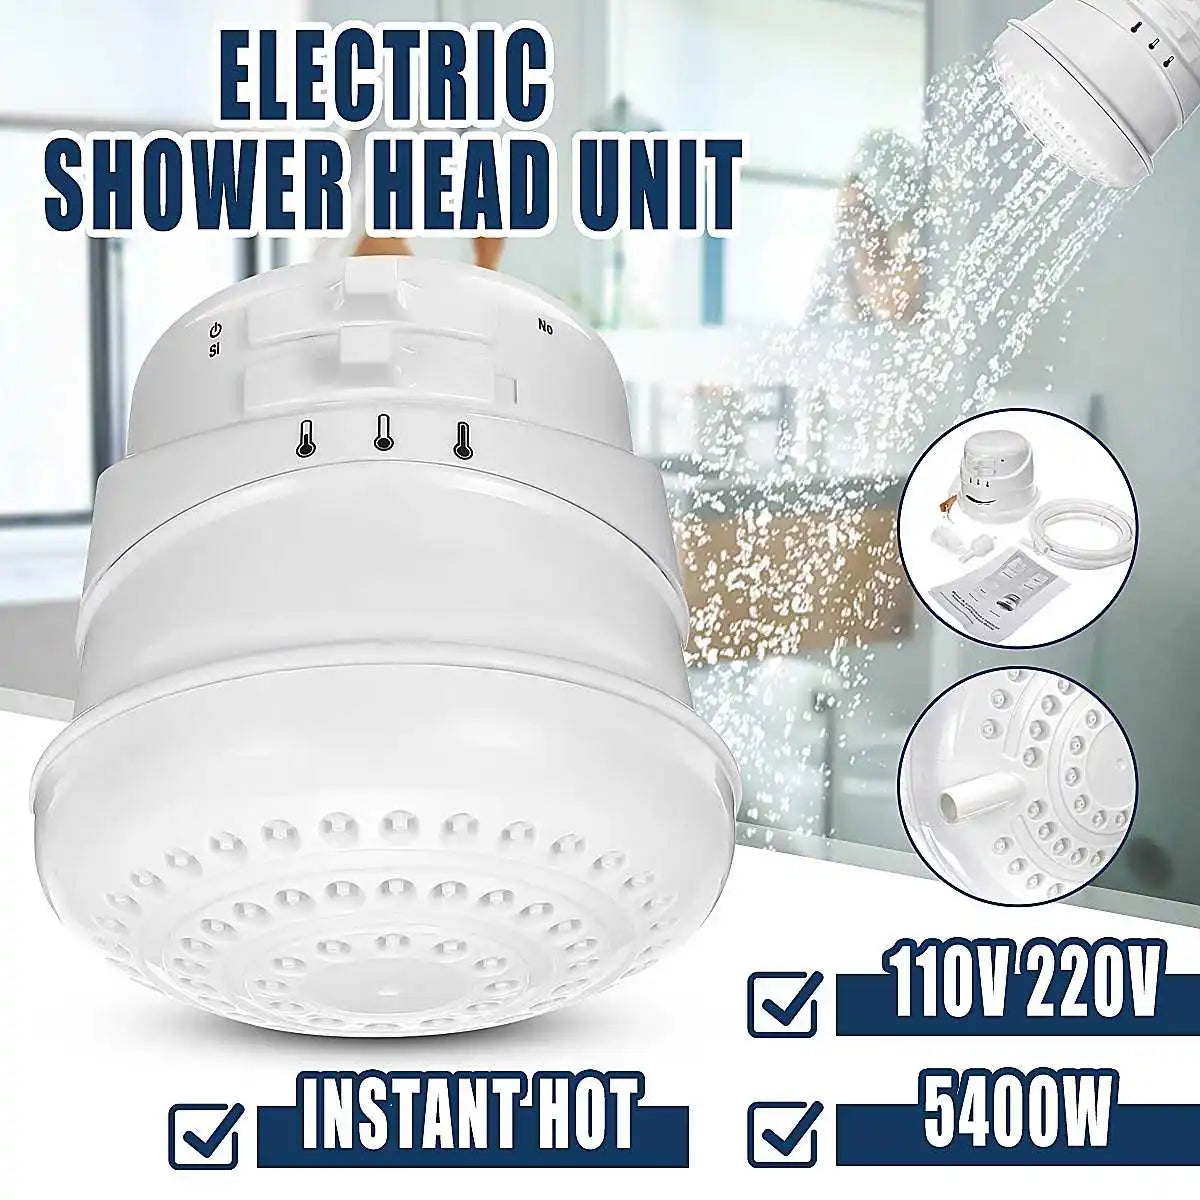 2m Hose 5400W Electric Shower Head Tankless Instant Hot Water Heater 3 Temperature Adjustable Portable Calorifier 110V/220V